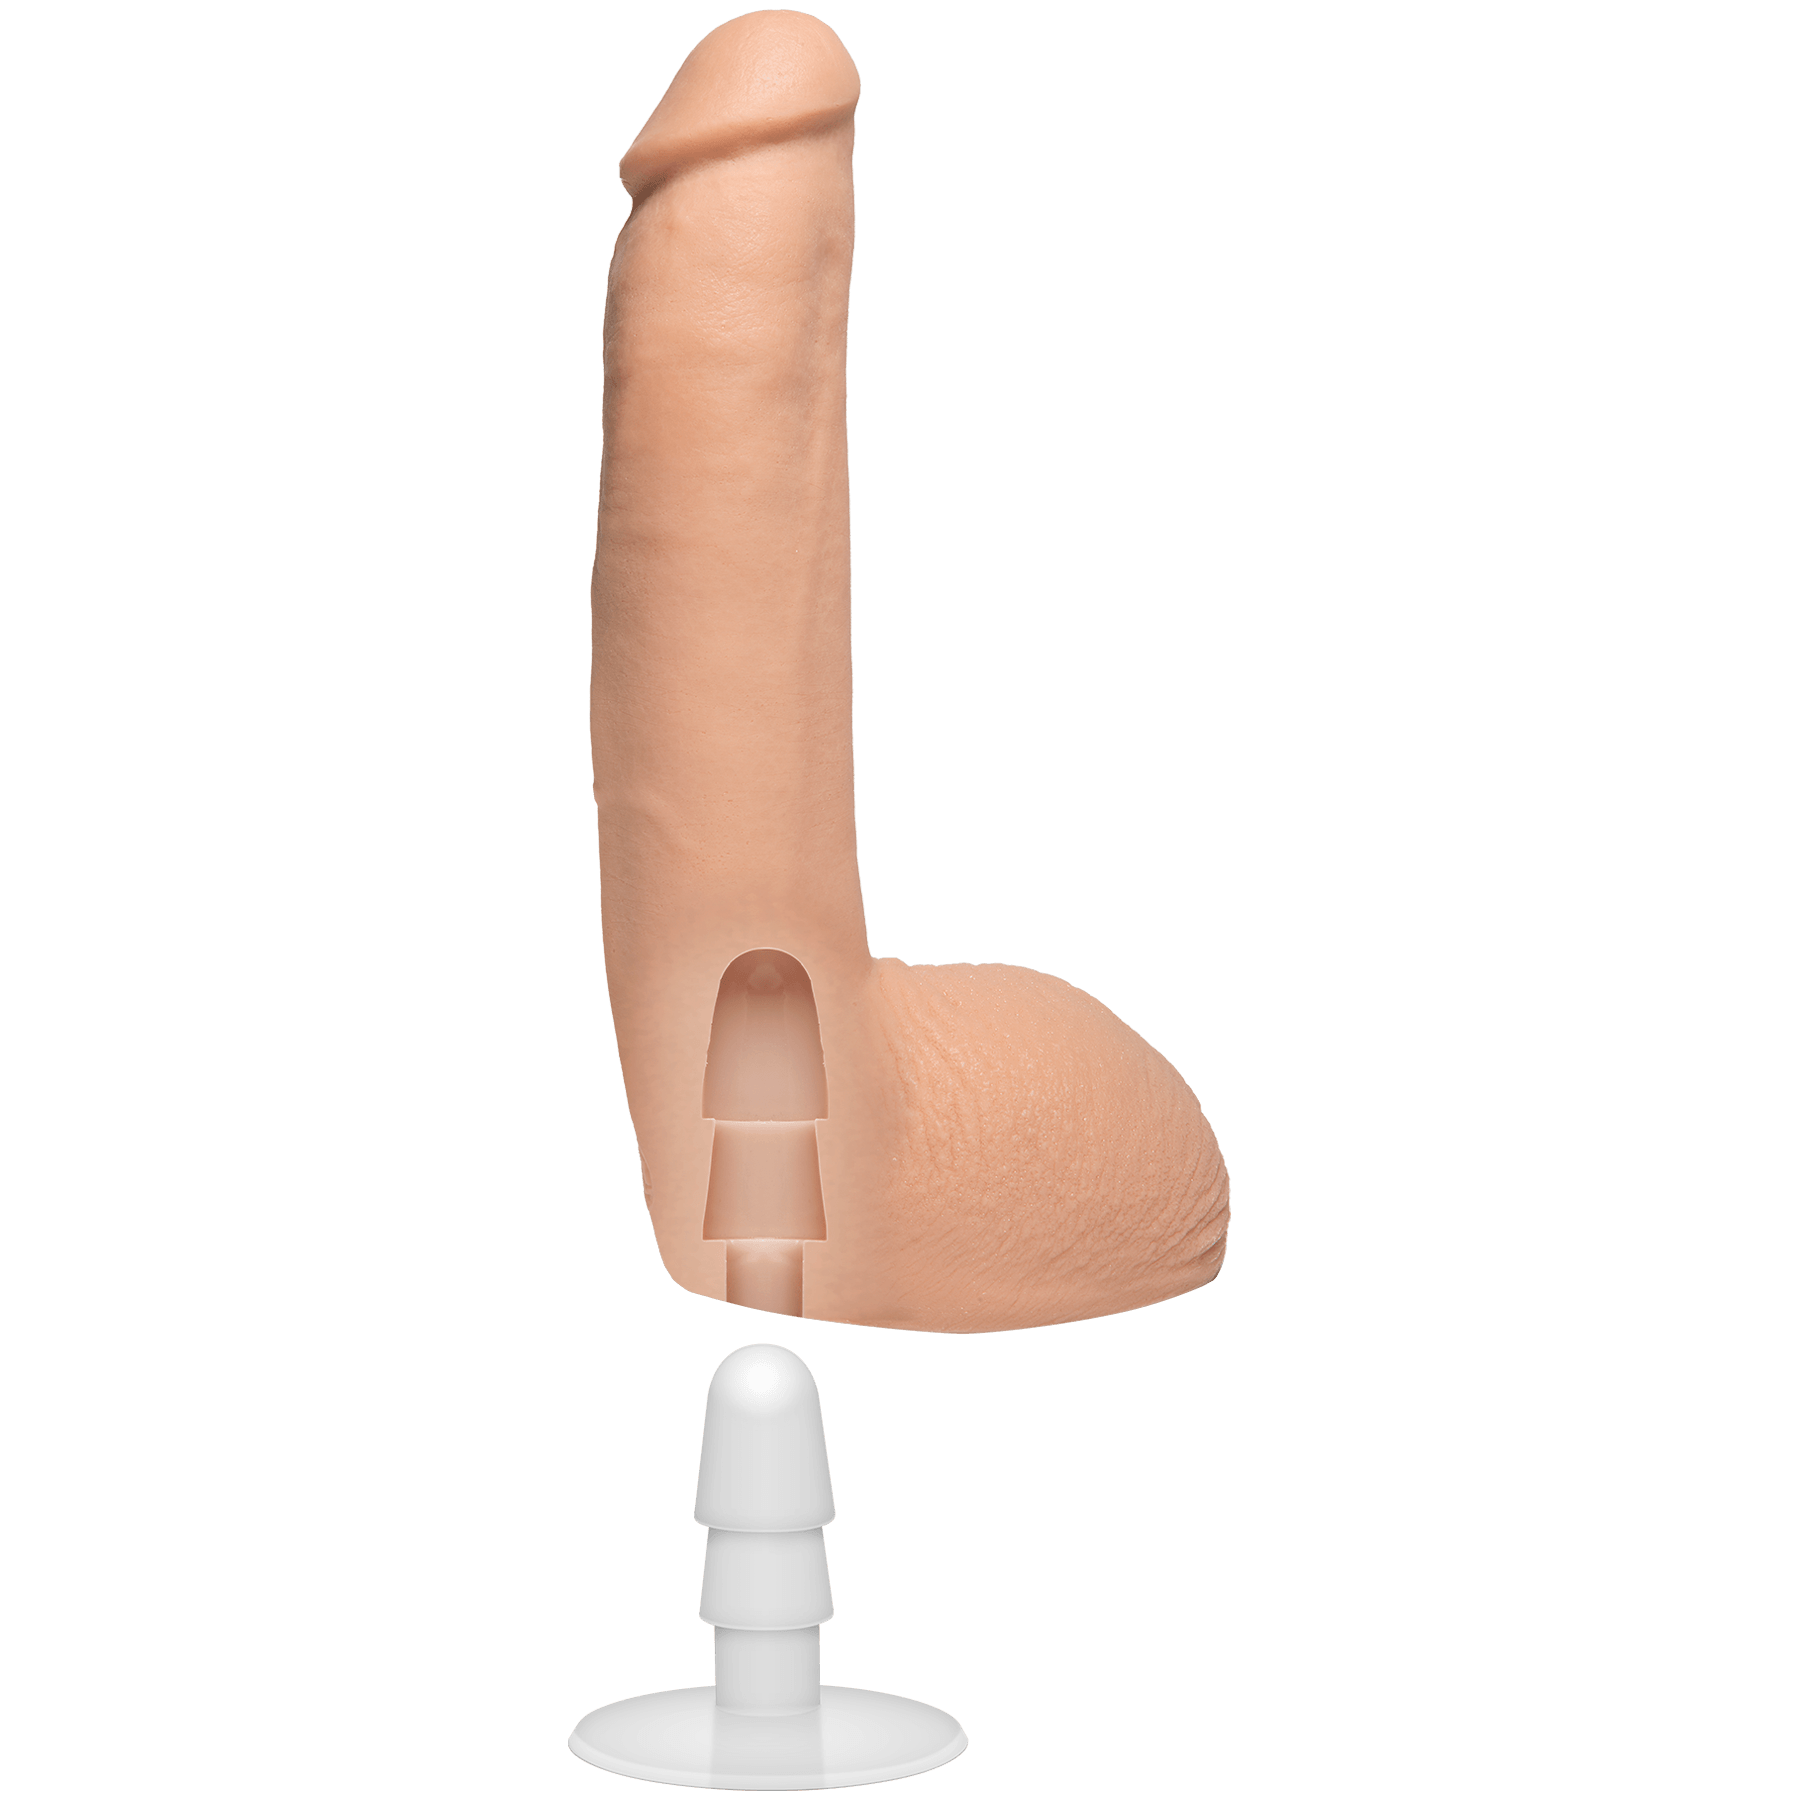 Doc Johnson Signature Cocks Xander Corvus Ultrask 7in Cock - Buy At Luxury Toy X - Free 3-Day Shipping